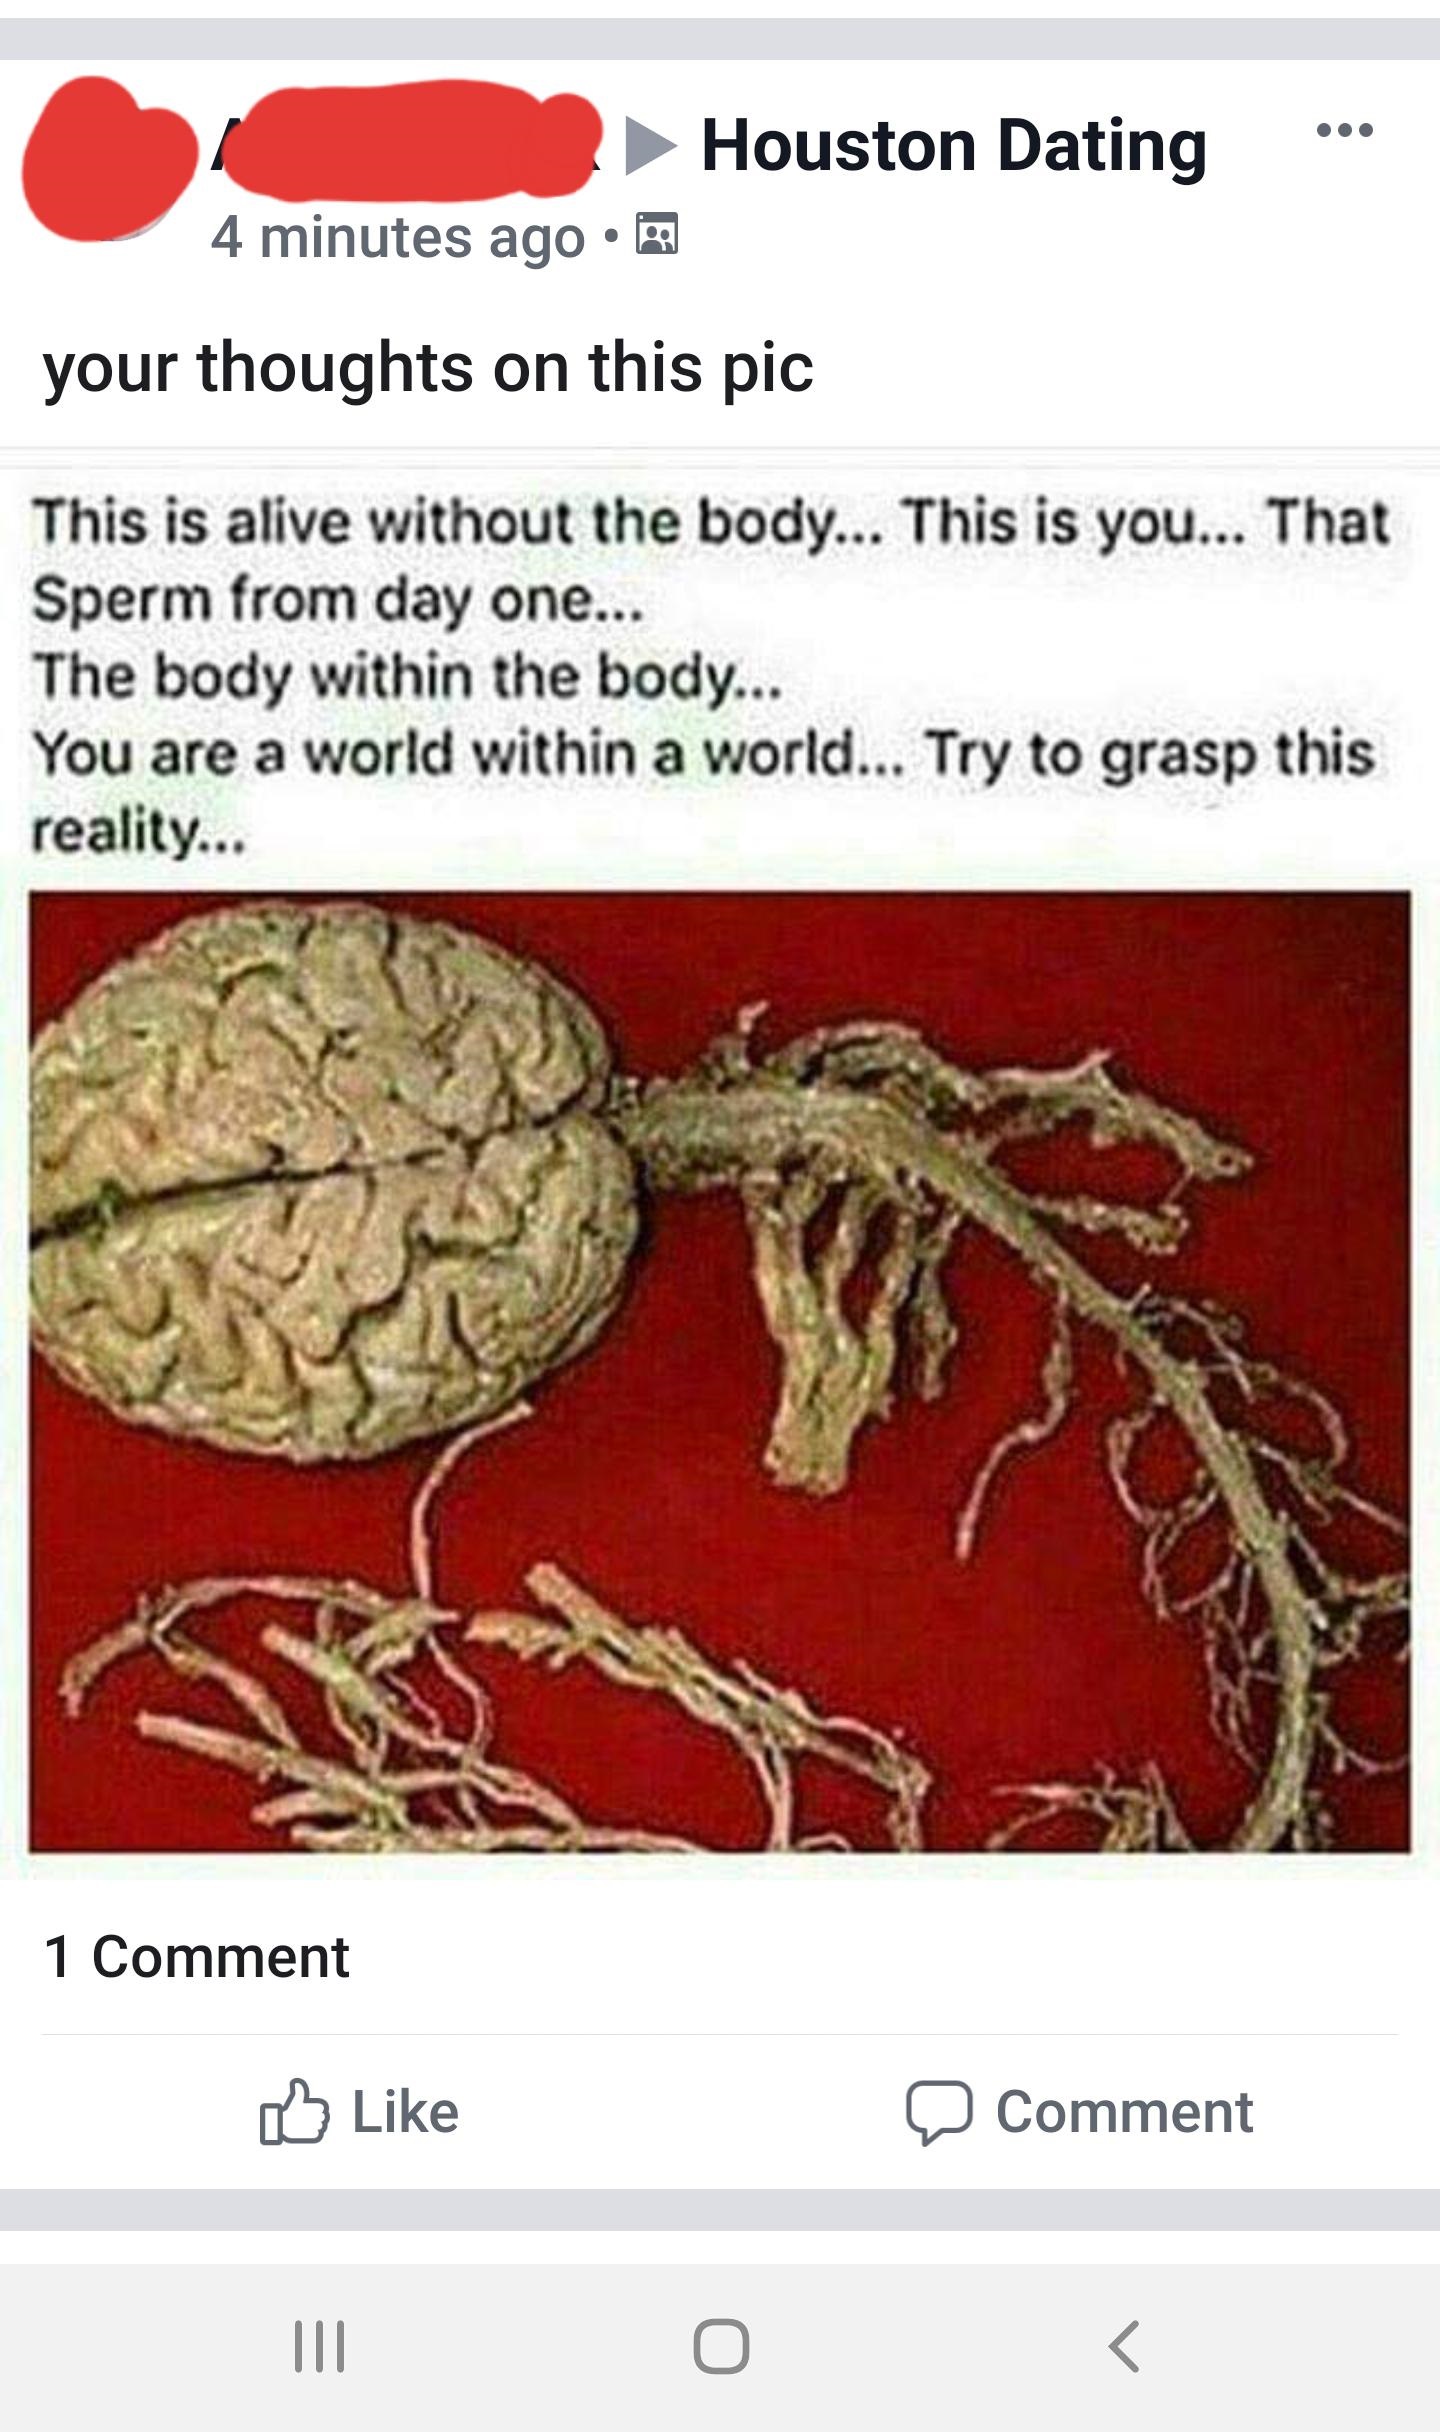 brain and spinal cord real - Houston Dating 4 minutes ago .mn your thoughts on this pic This is alive without the body... This is you... That Sperm from day one... The body within the body... You are a world within a world... Try to grasp this reality... 